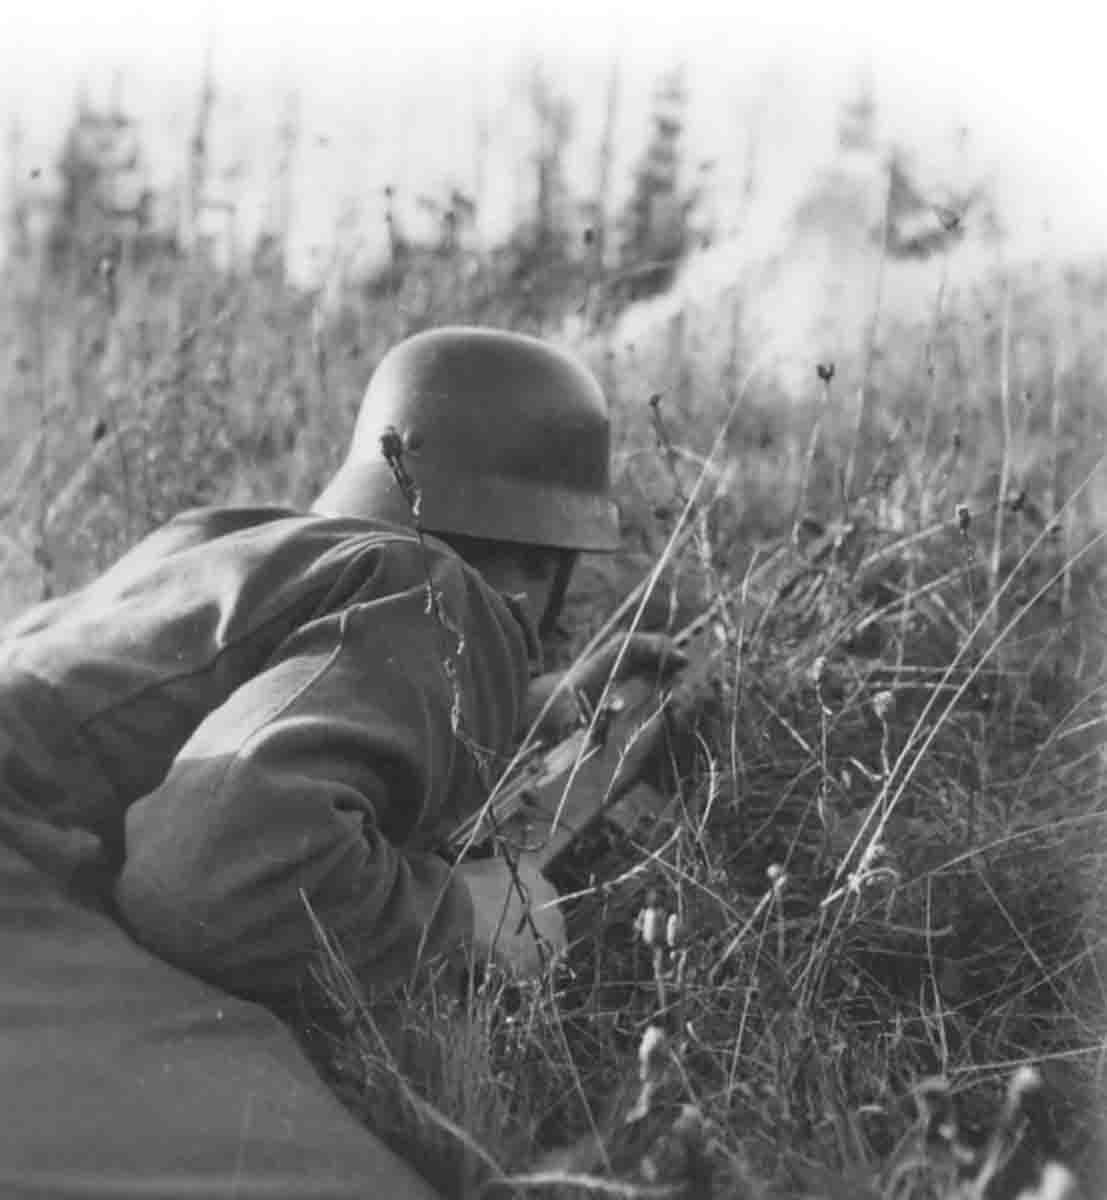 This German landser (infantryman) on the Eastern Front is armed with an SVT40.